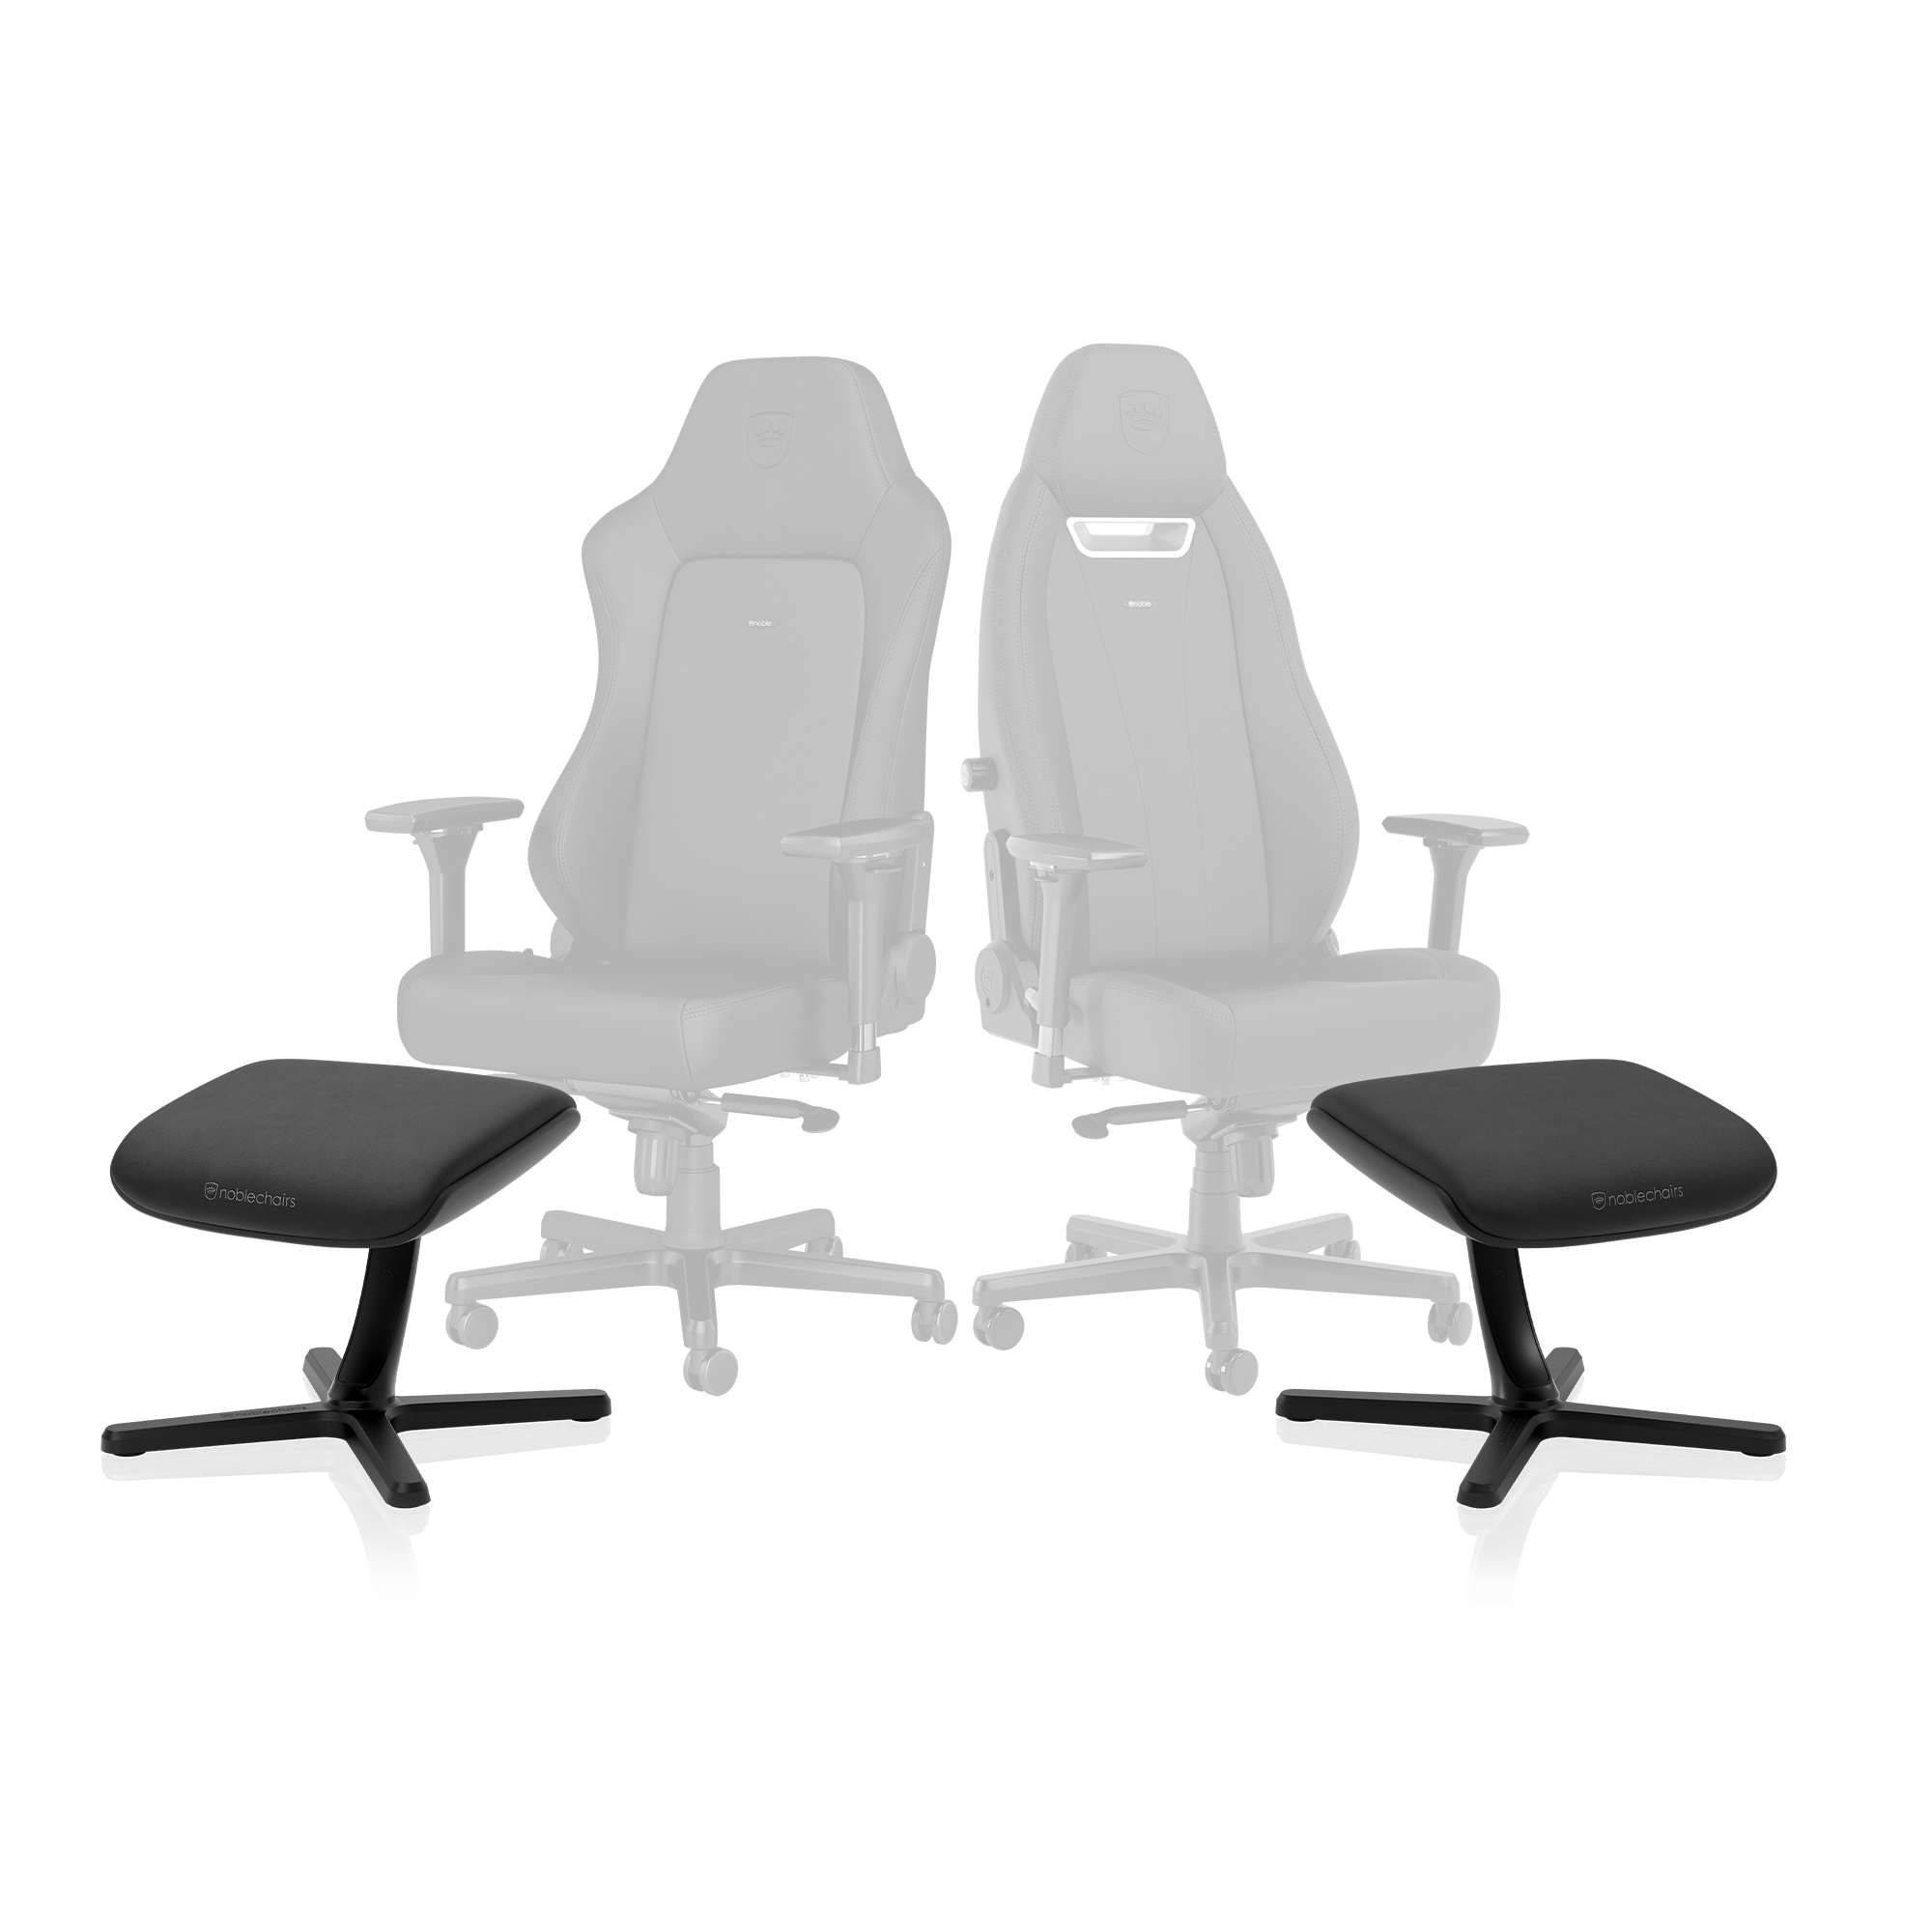 noblechairs - noblechairs Footrest 2 Black Edition